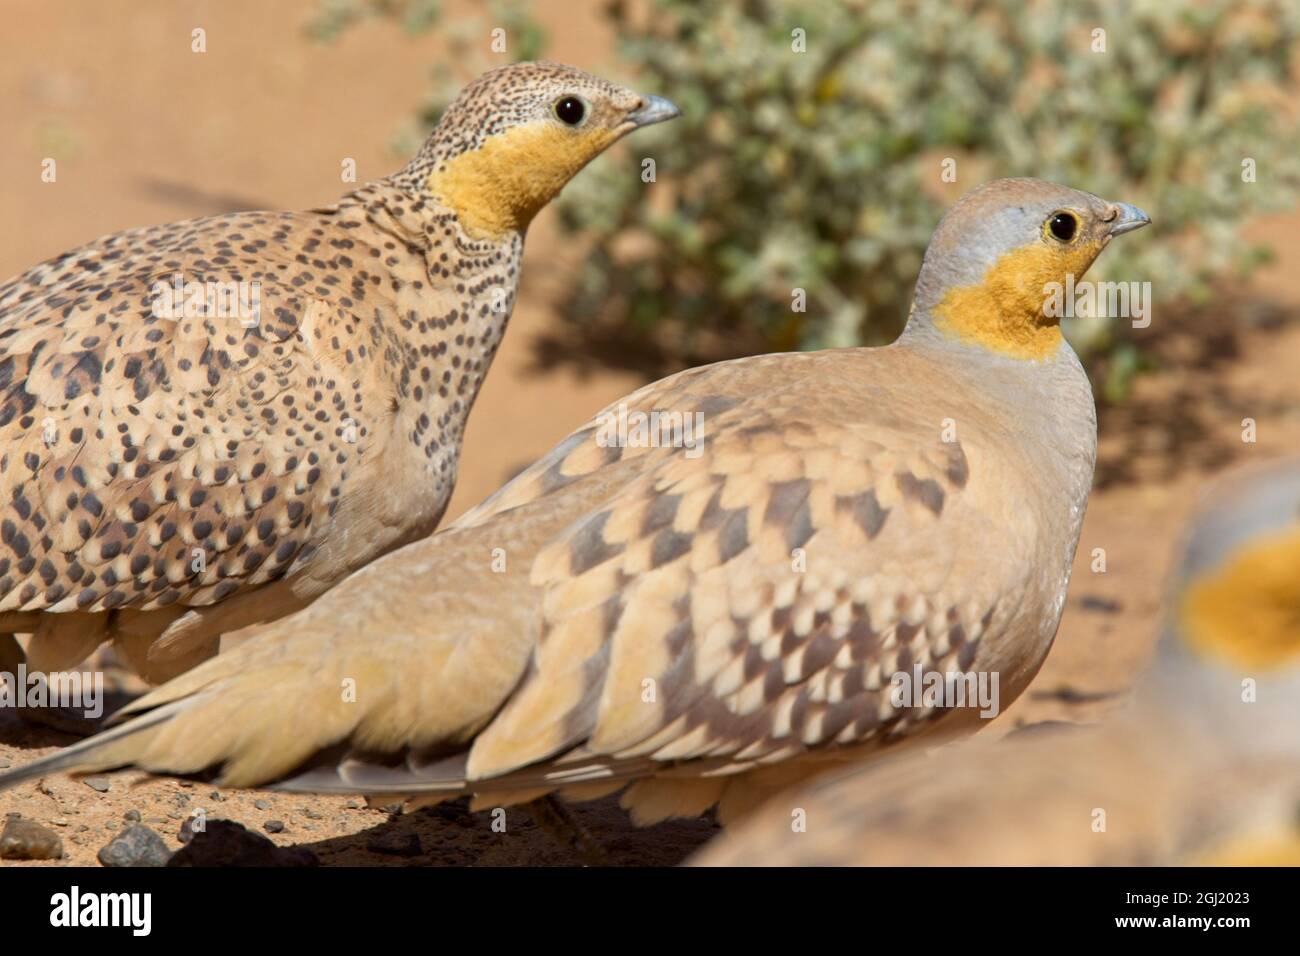 Spotted Sandgrouse (Pterocles senegallus), a male and female pair in the desert, Sahara, Morocco. Stock Photo